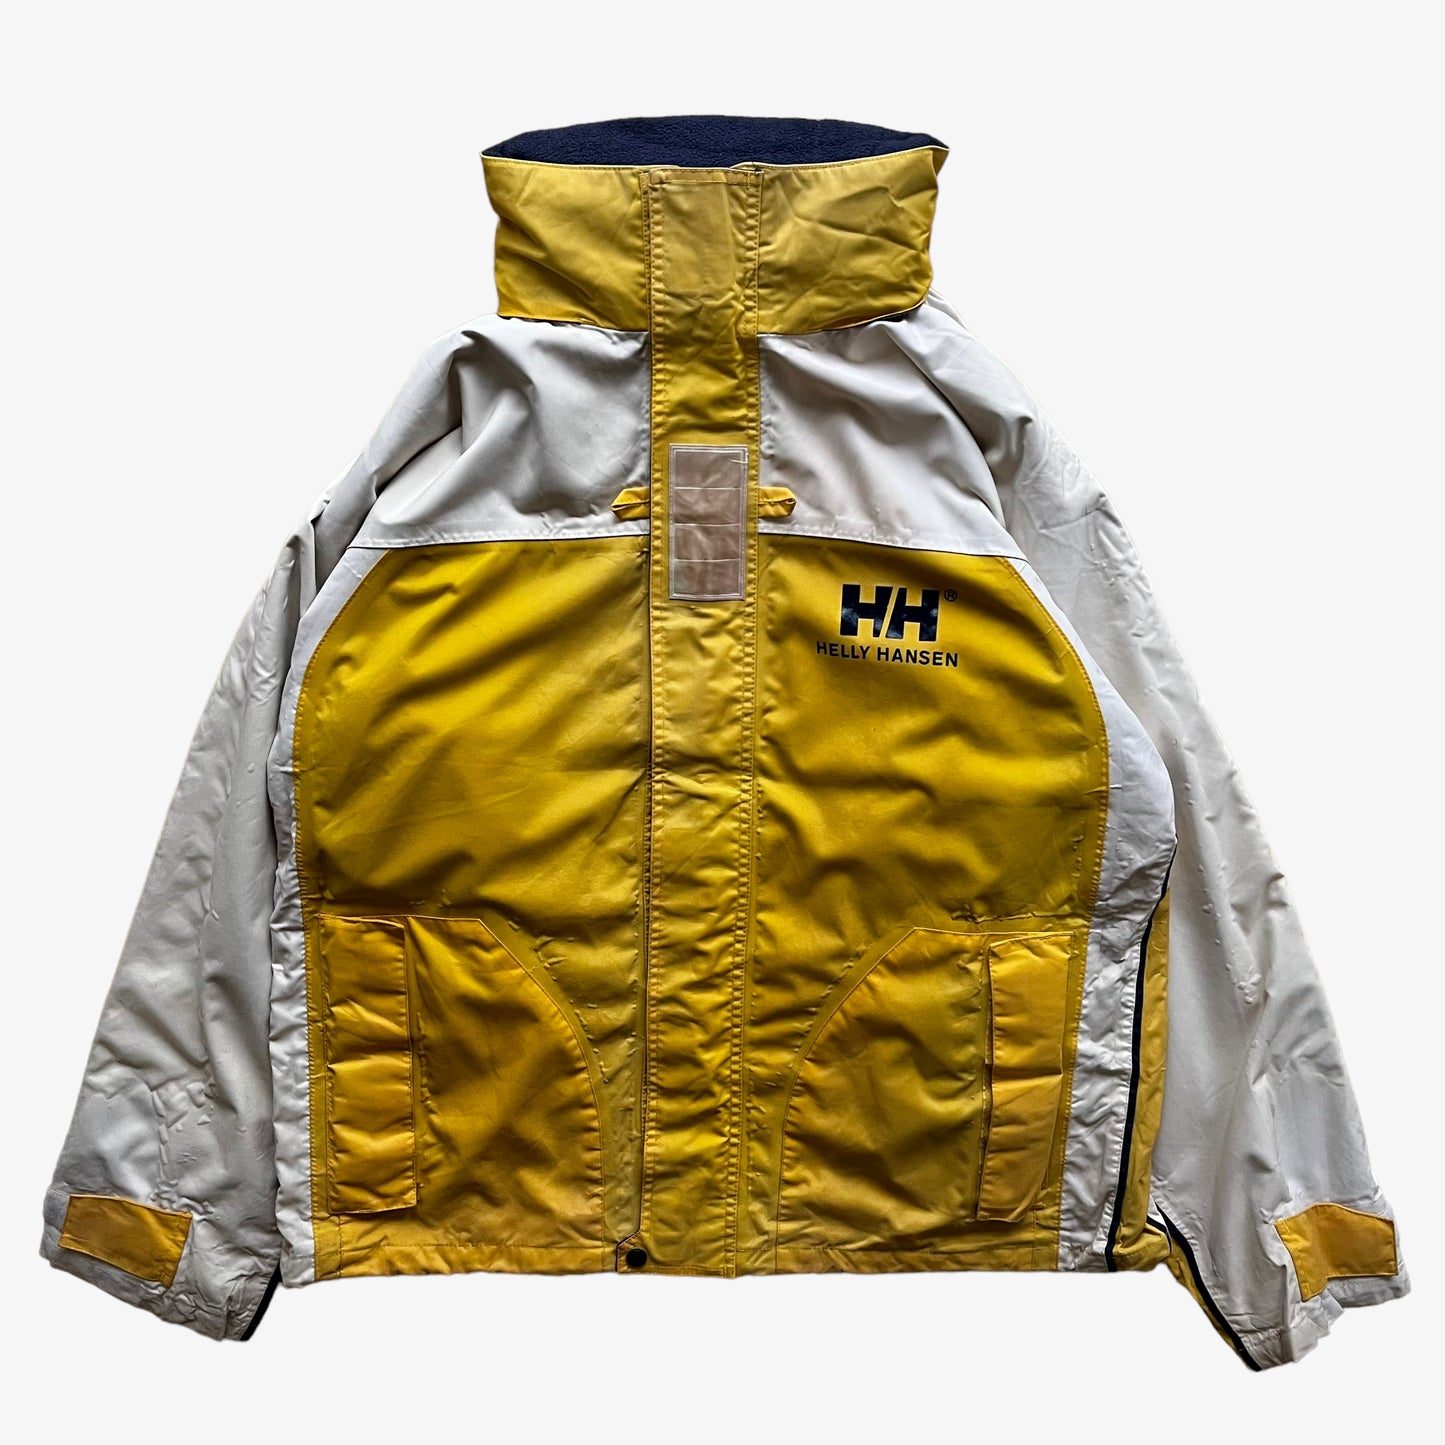 Vintage 90s Helly Hansen Yellow Sailing Jacket With Fold Away Hood - Casspios Dream